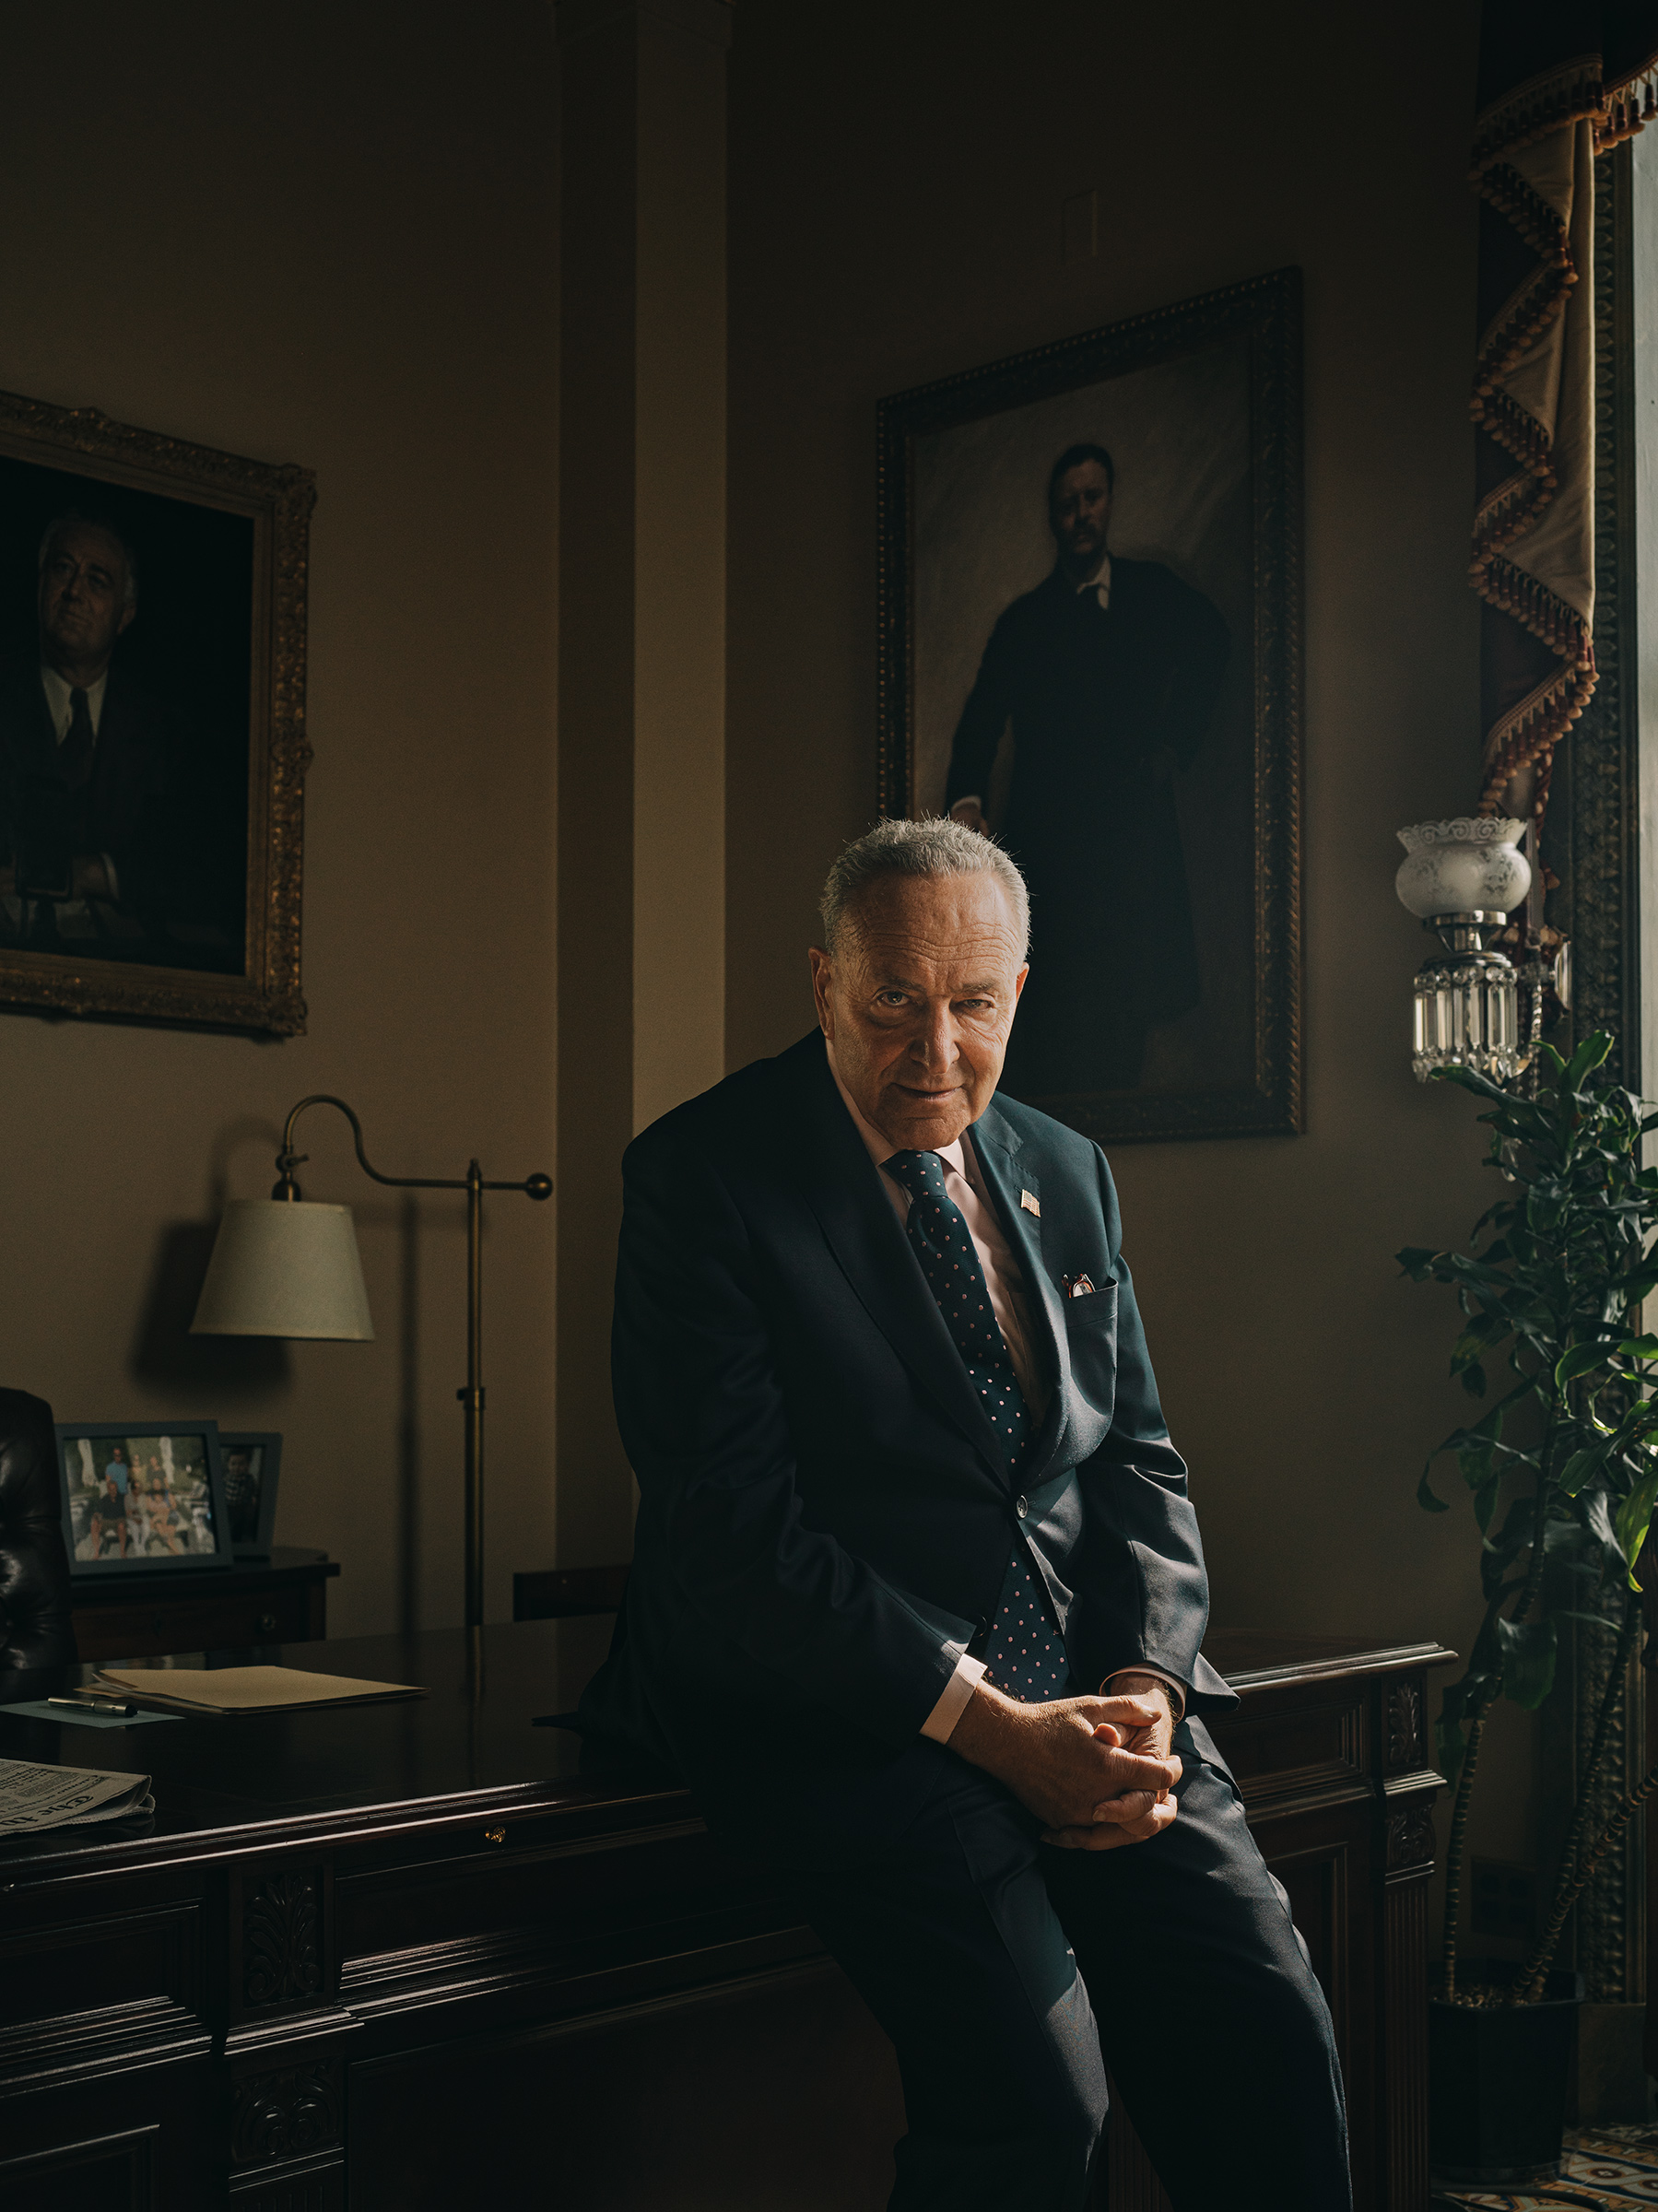 The Senate majority leader in his office at the U.S. Capitol on Aug. 4 (Greg Kahn for TIME)